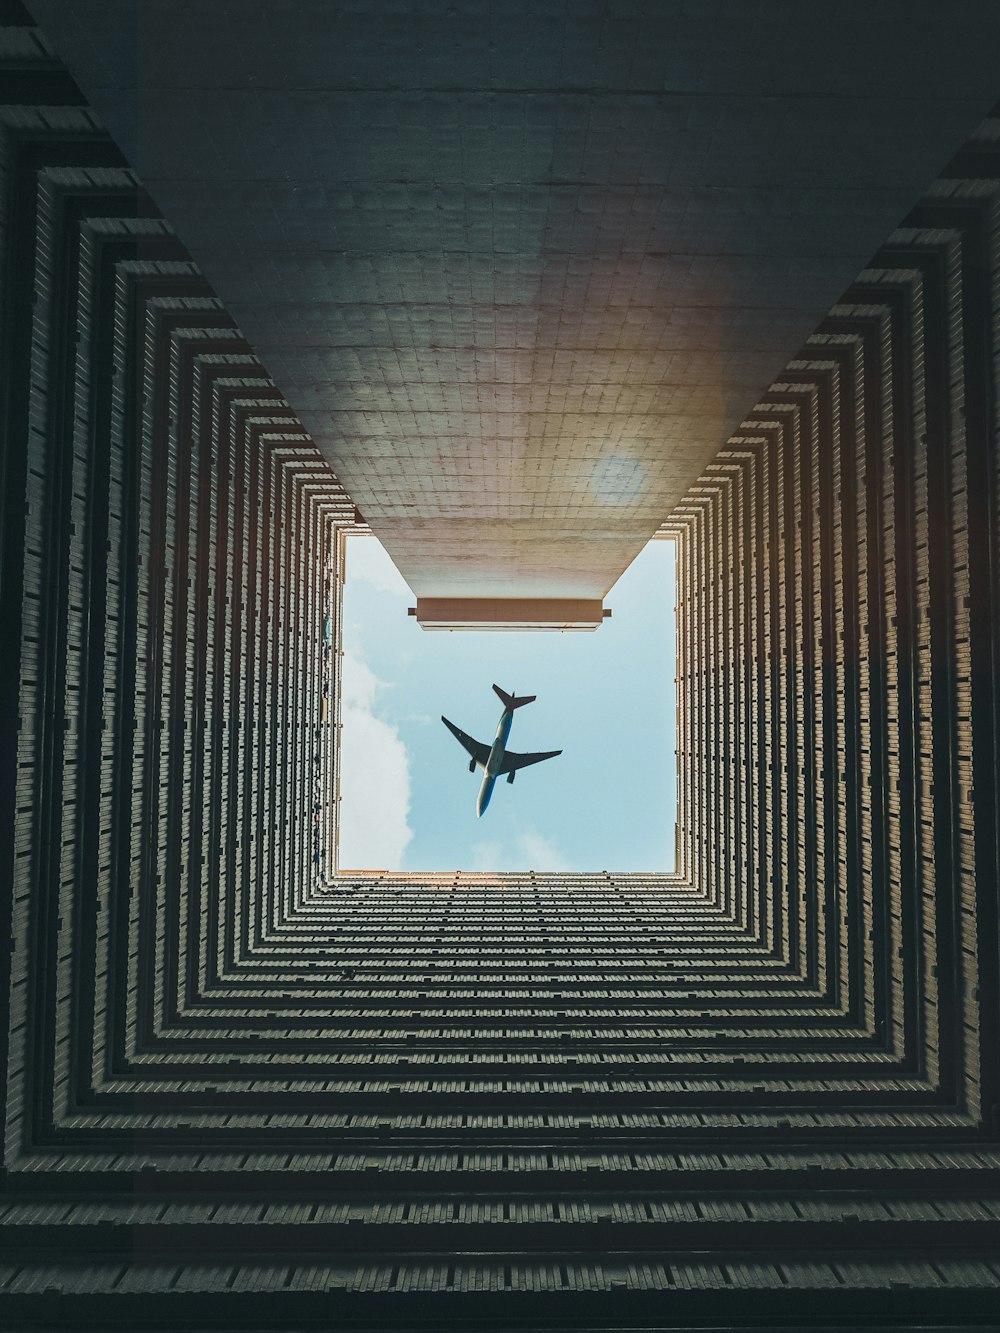 an airplane is flying through a tunnel of bricks